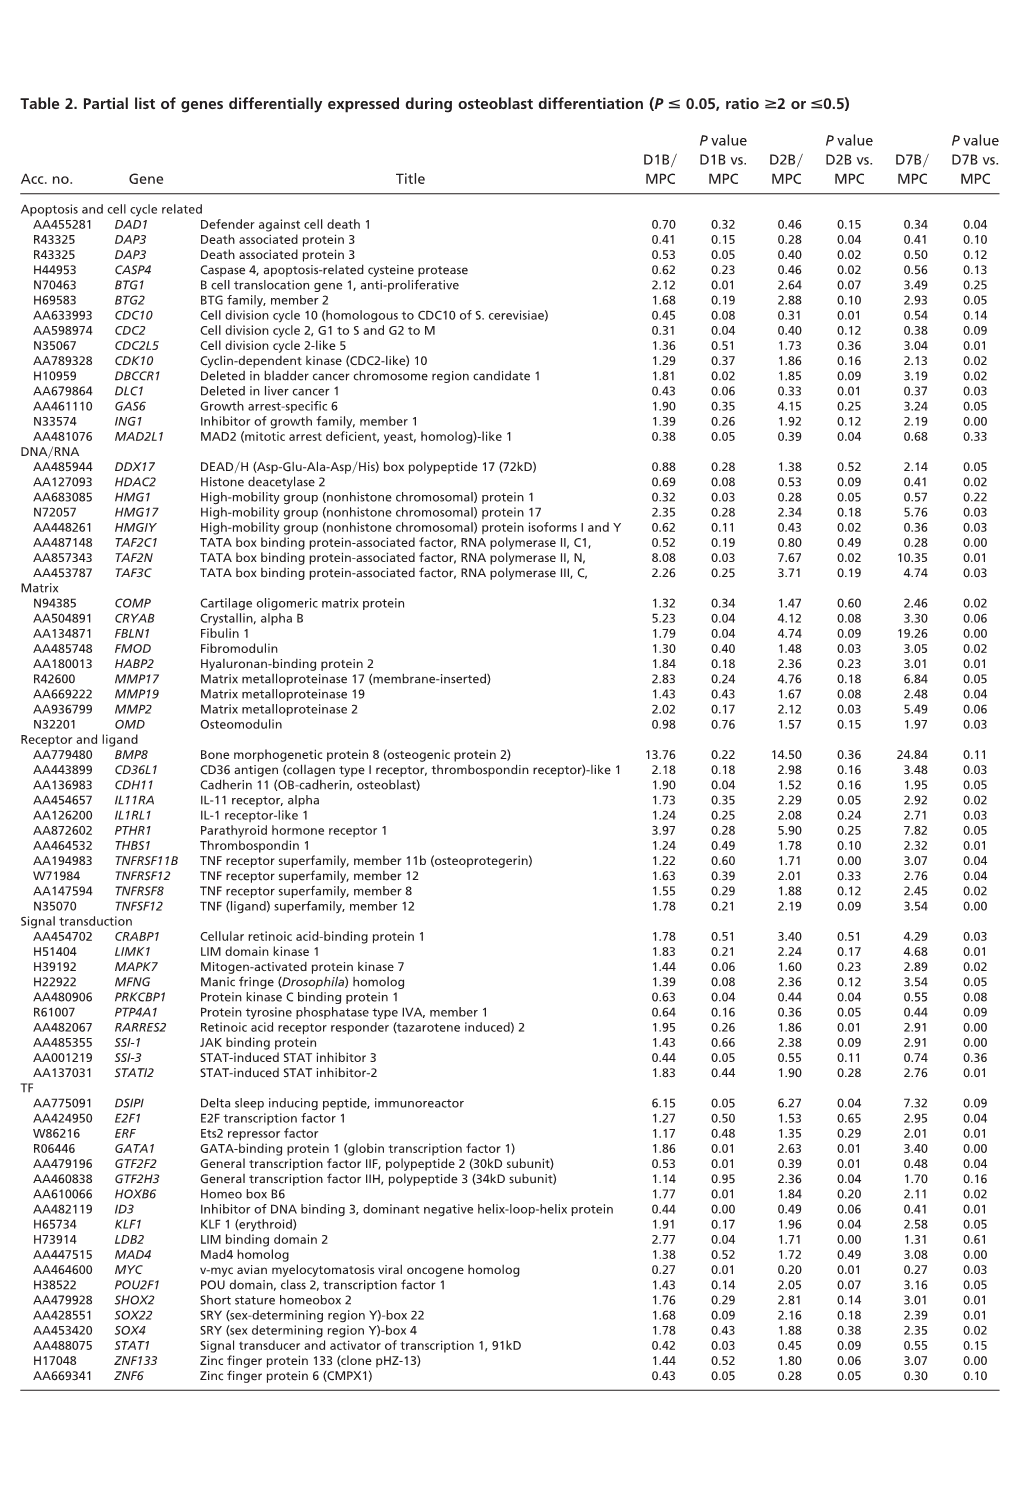 Table 2. Partial List of Genes Differentially Expressed